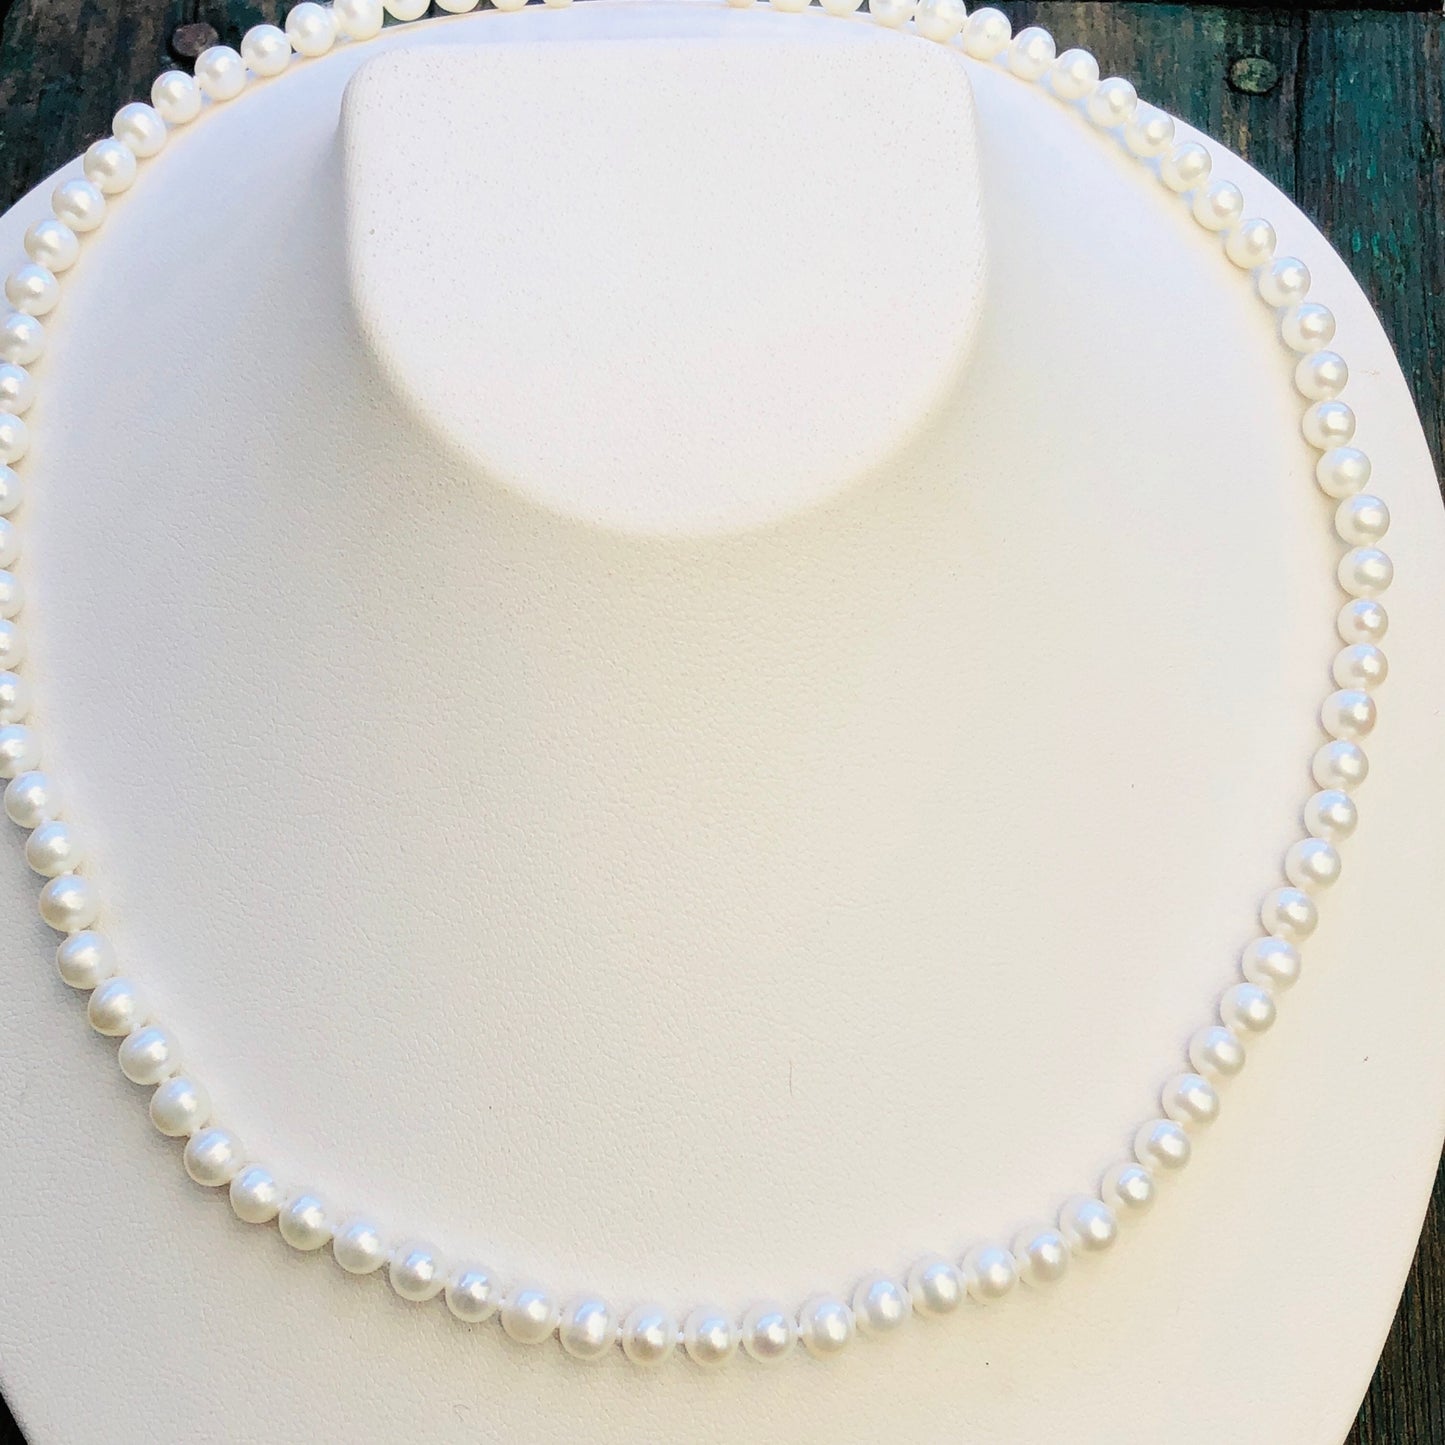 10k gold Freshwater Genuine Pearl Necklace 18”